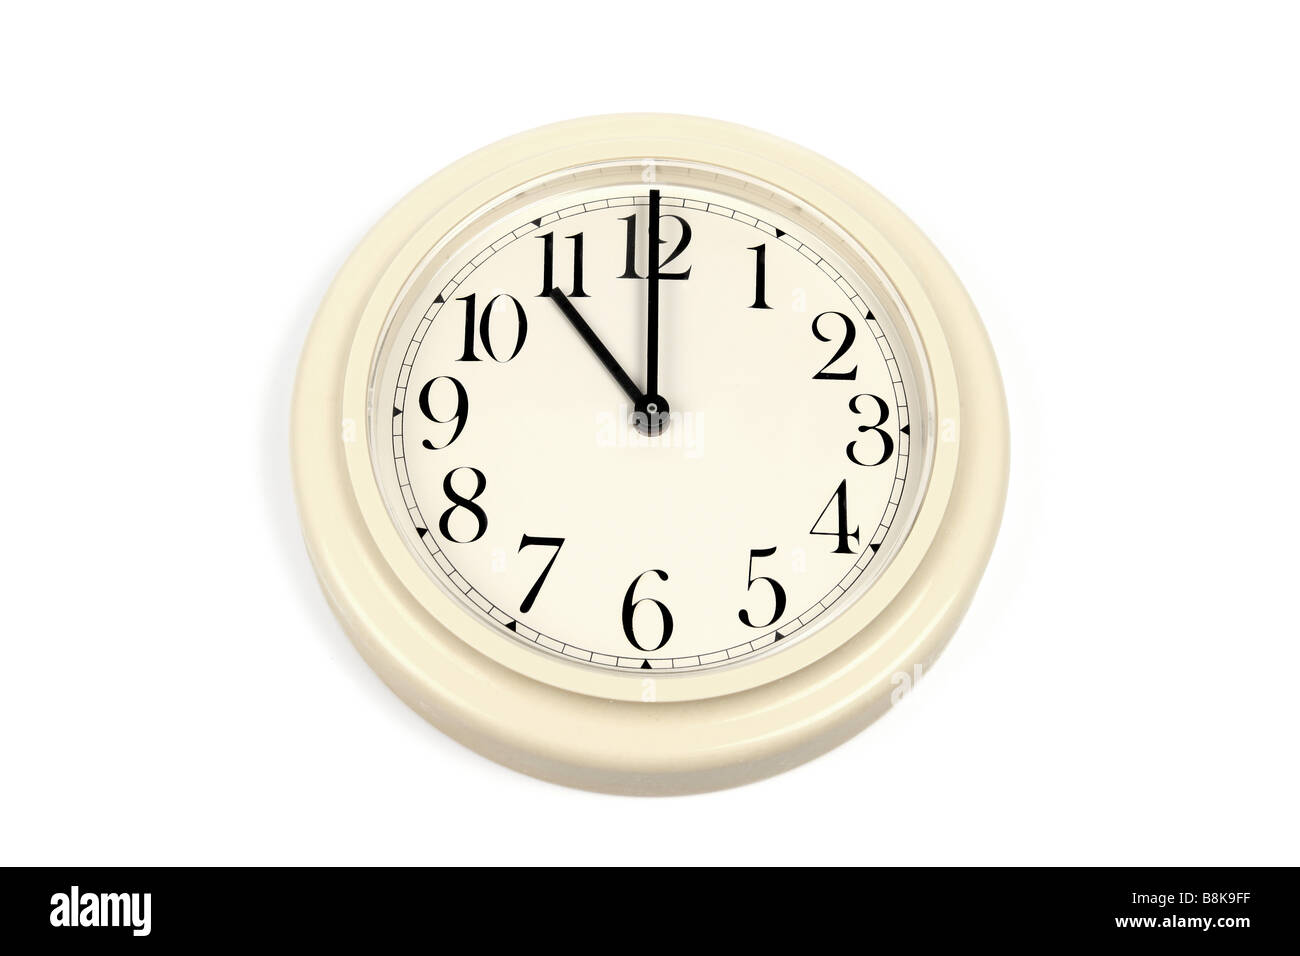 Wall clock against a white background Stock Photo